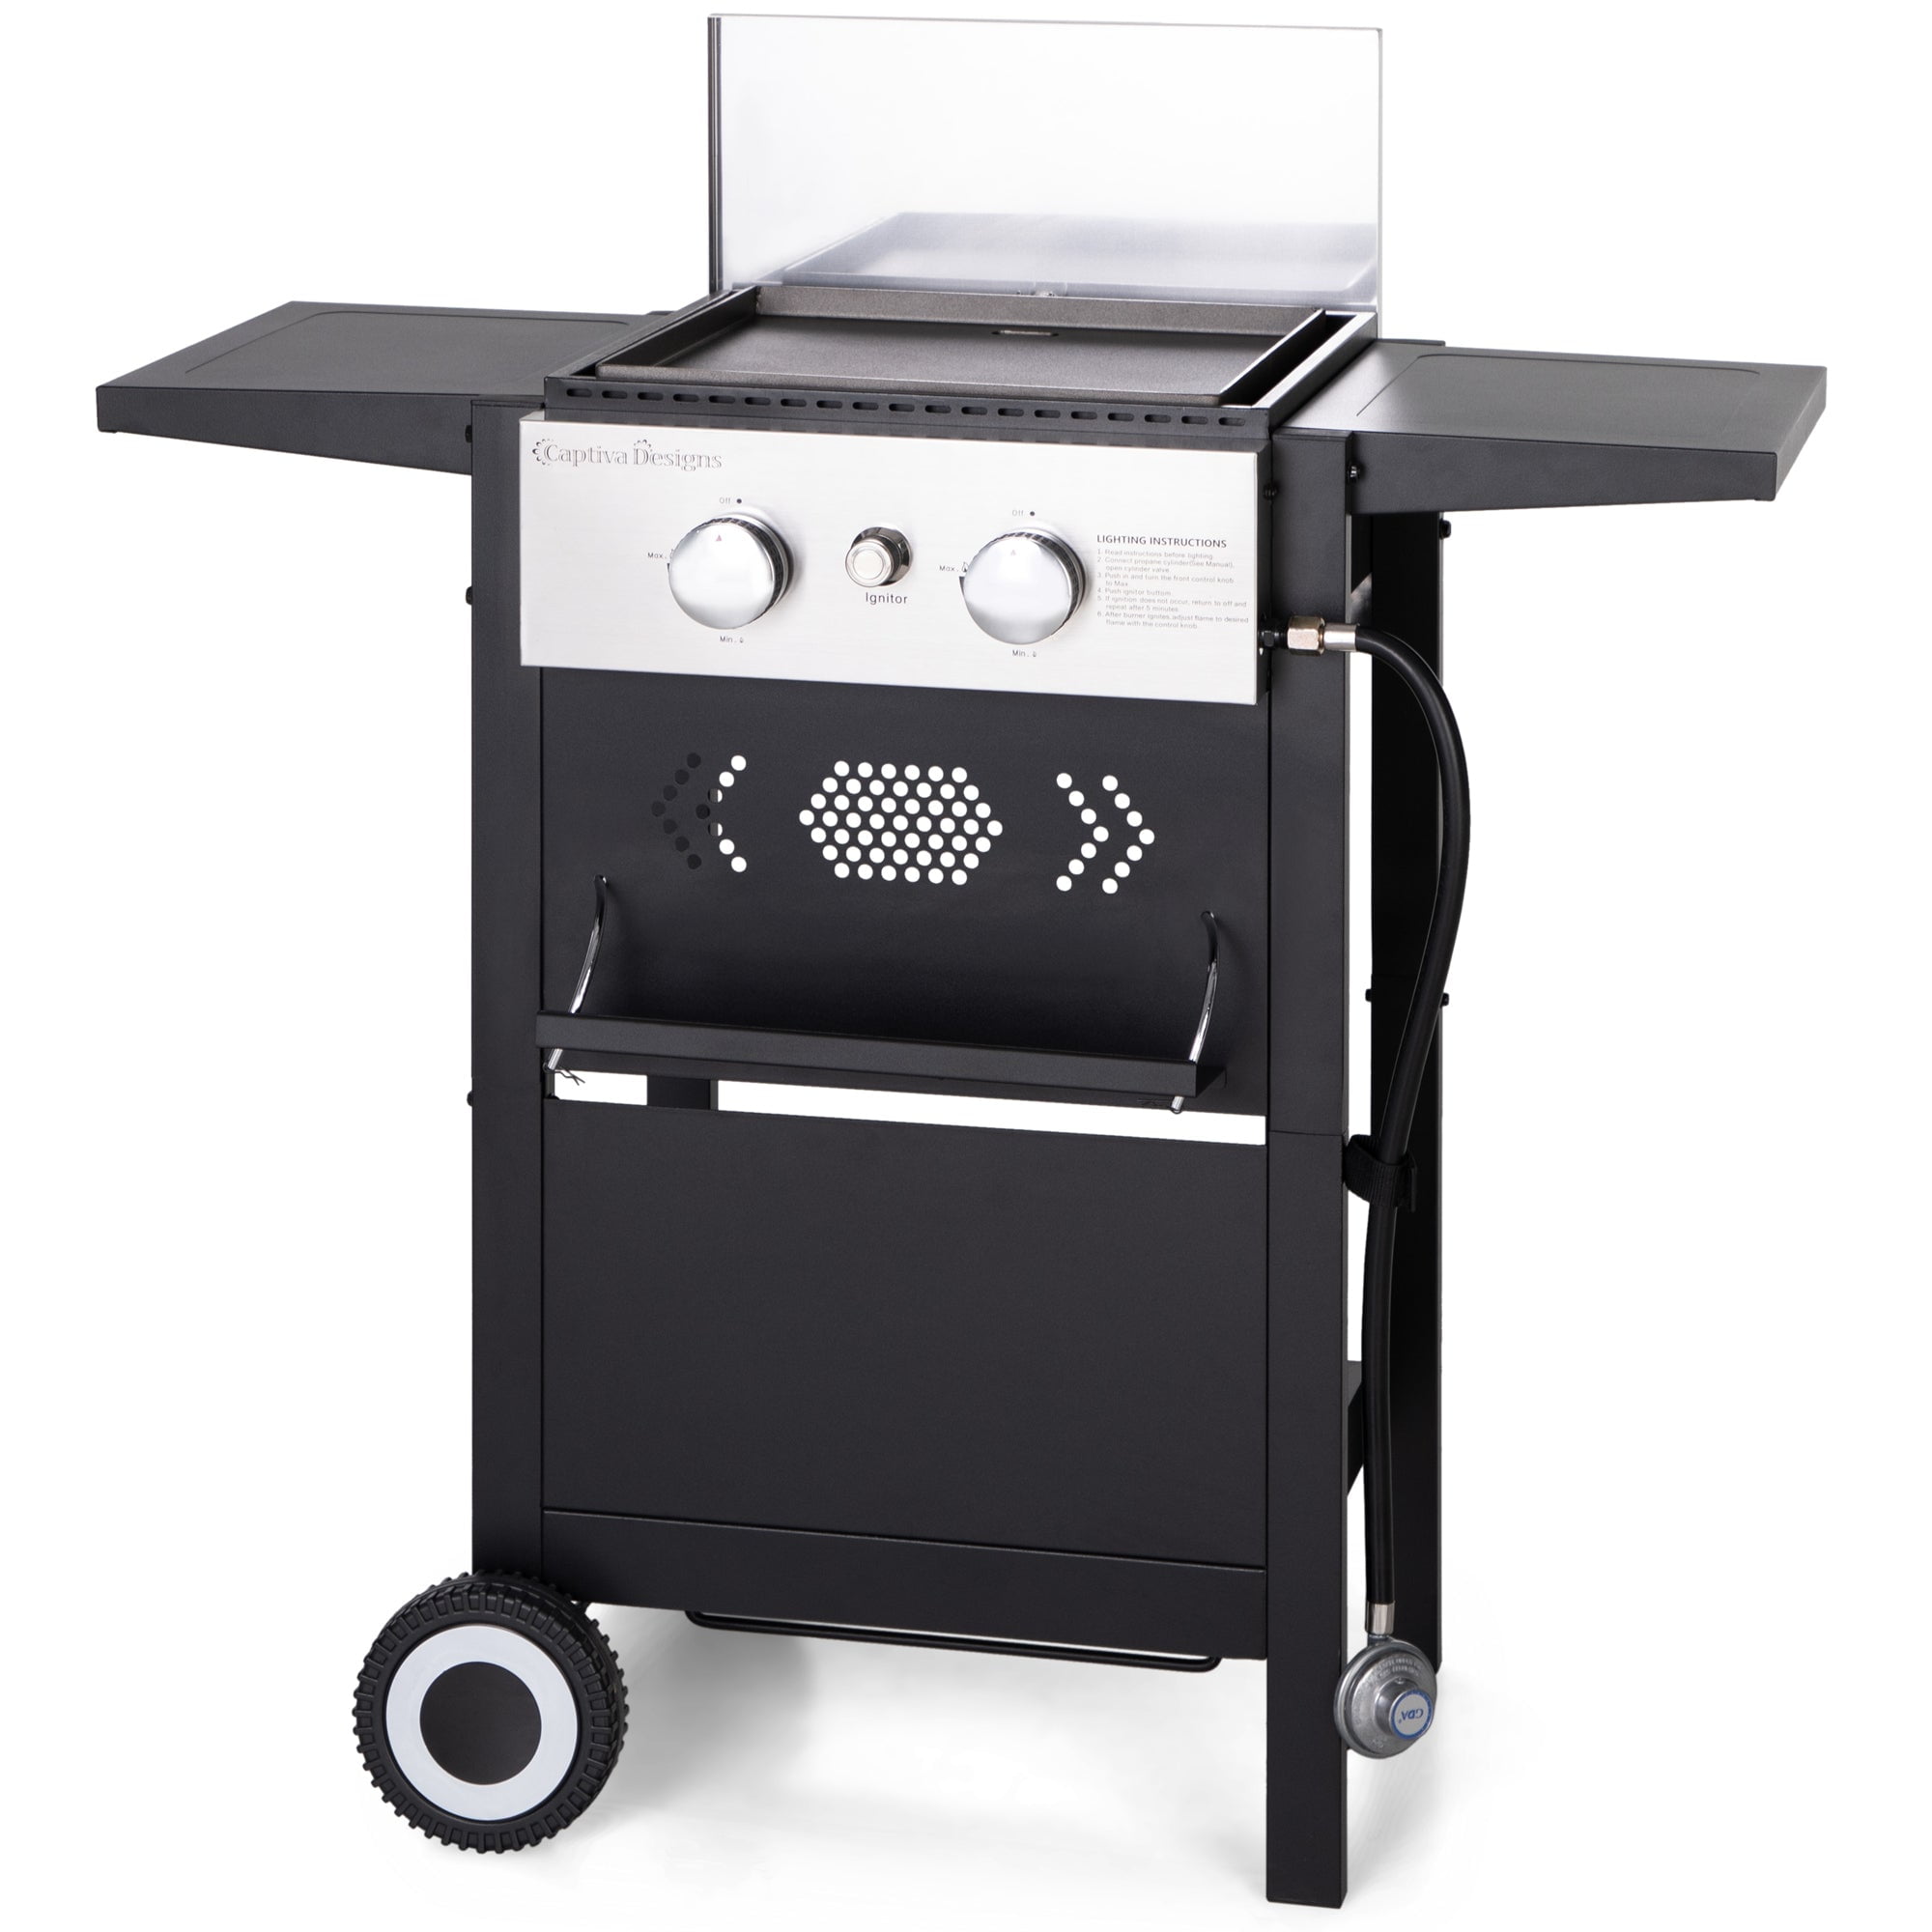  2 Burners BBQ Gas Grill, Commercial Gas Grill Griddle